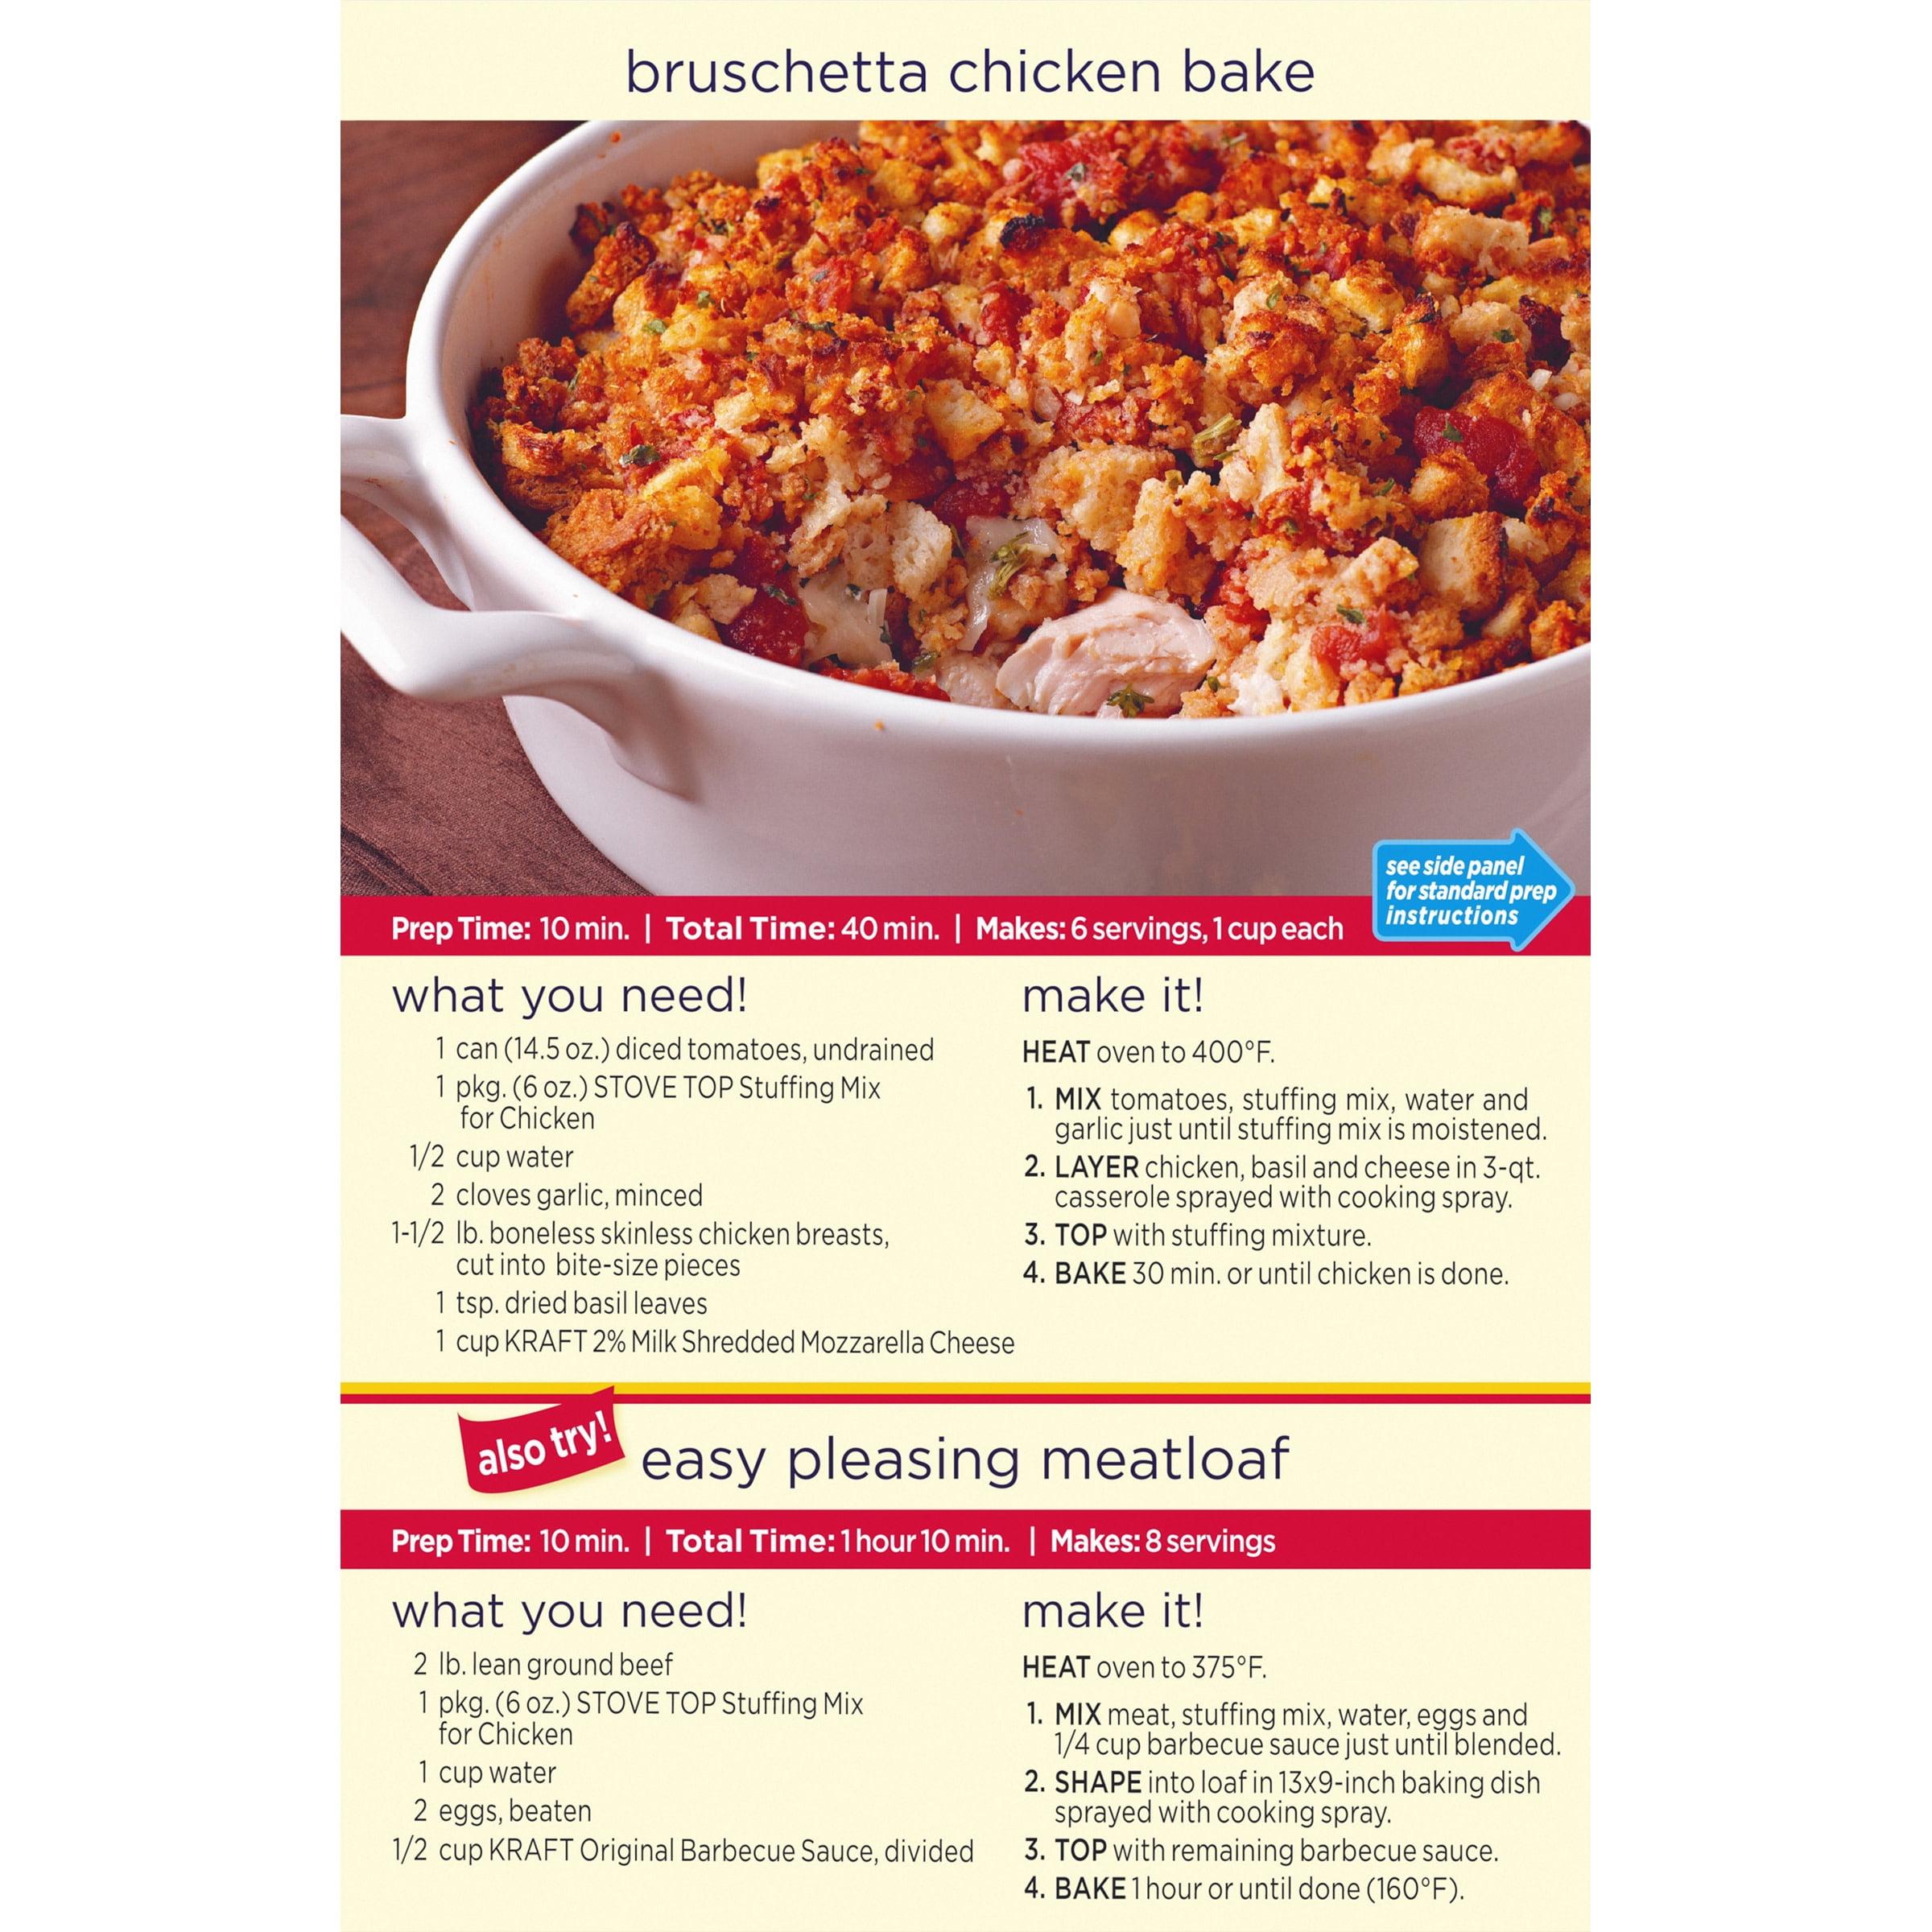 Stove Top Stuffing Mix for Chicken (6 oz Box)